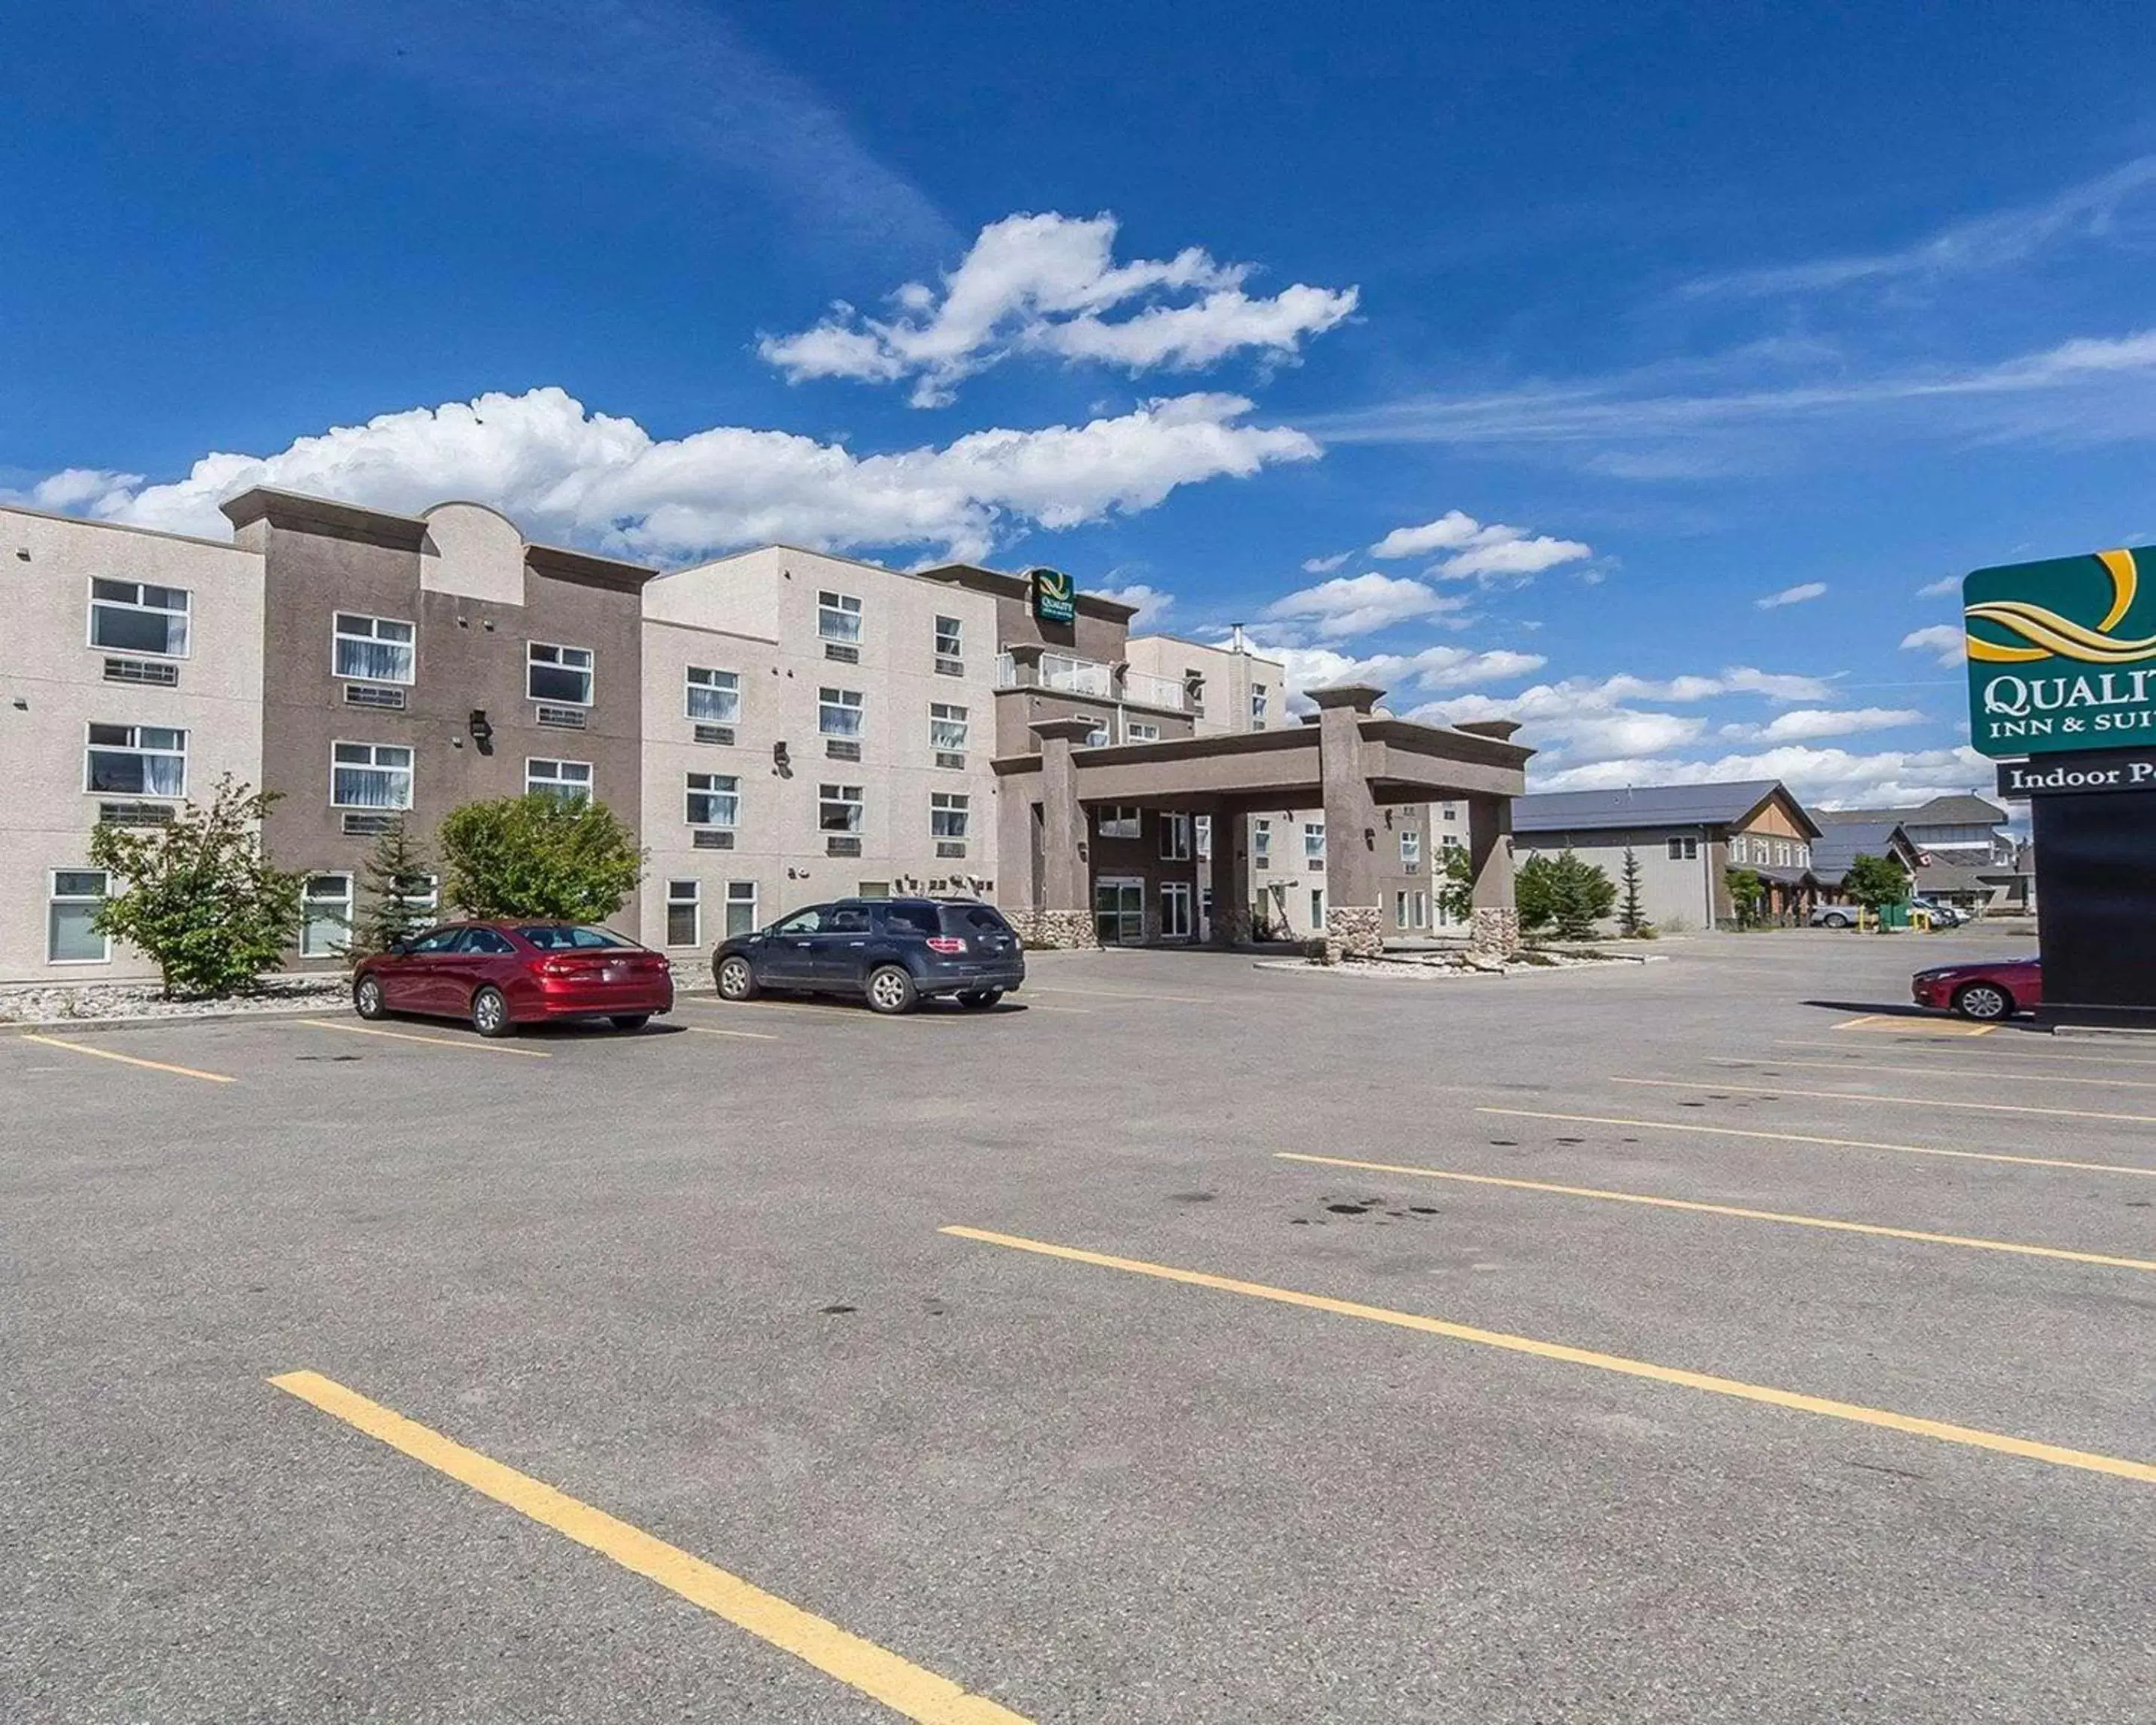 Property Building in Quality Inn & Suites Hinton